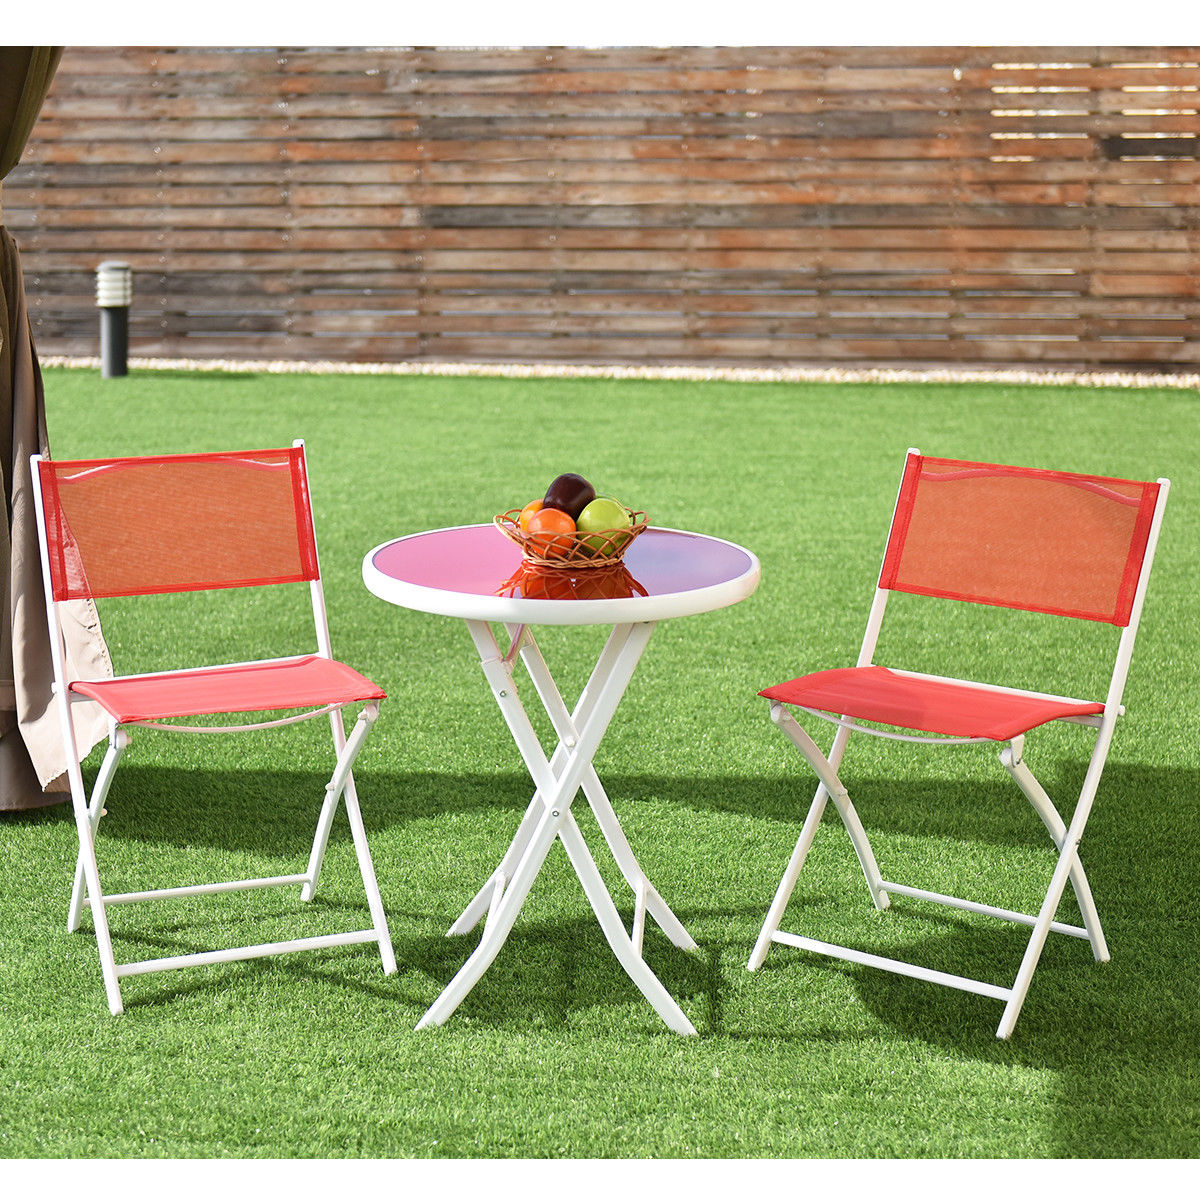 Costway 3 PCS Folding Bistro Table Chairs Set Garden Backyard Patio Furniture Red - image 1 of 7